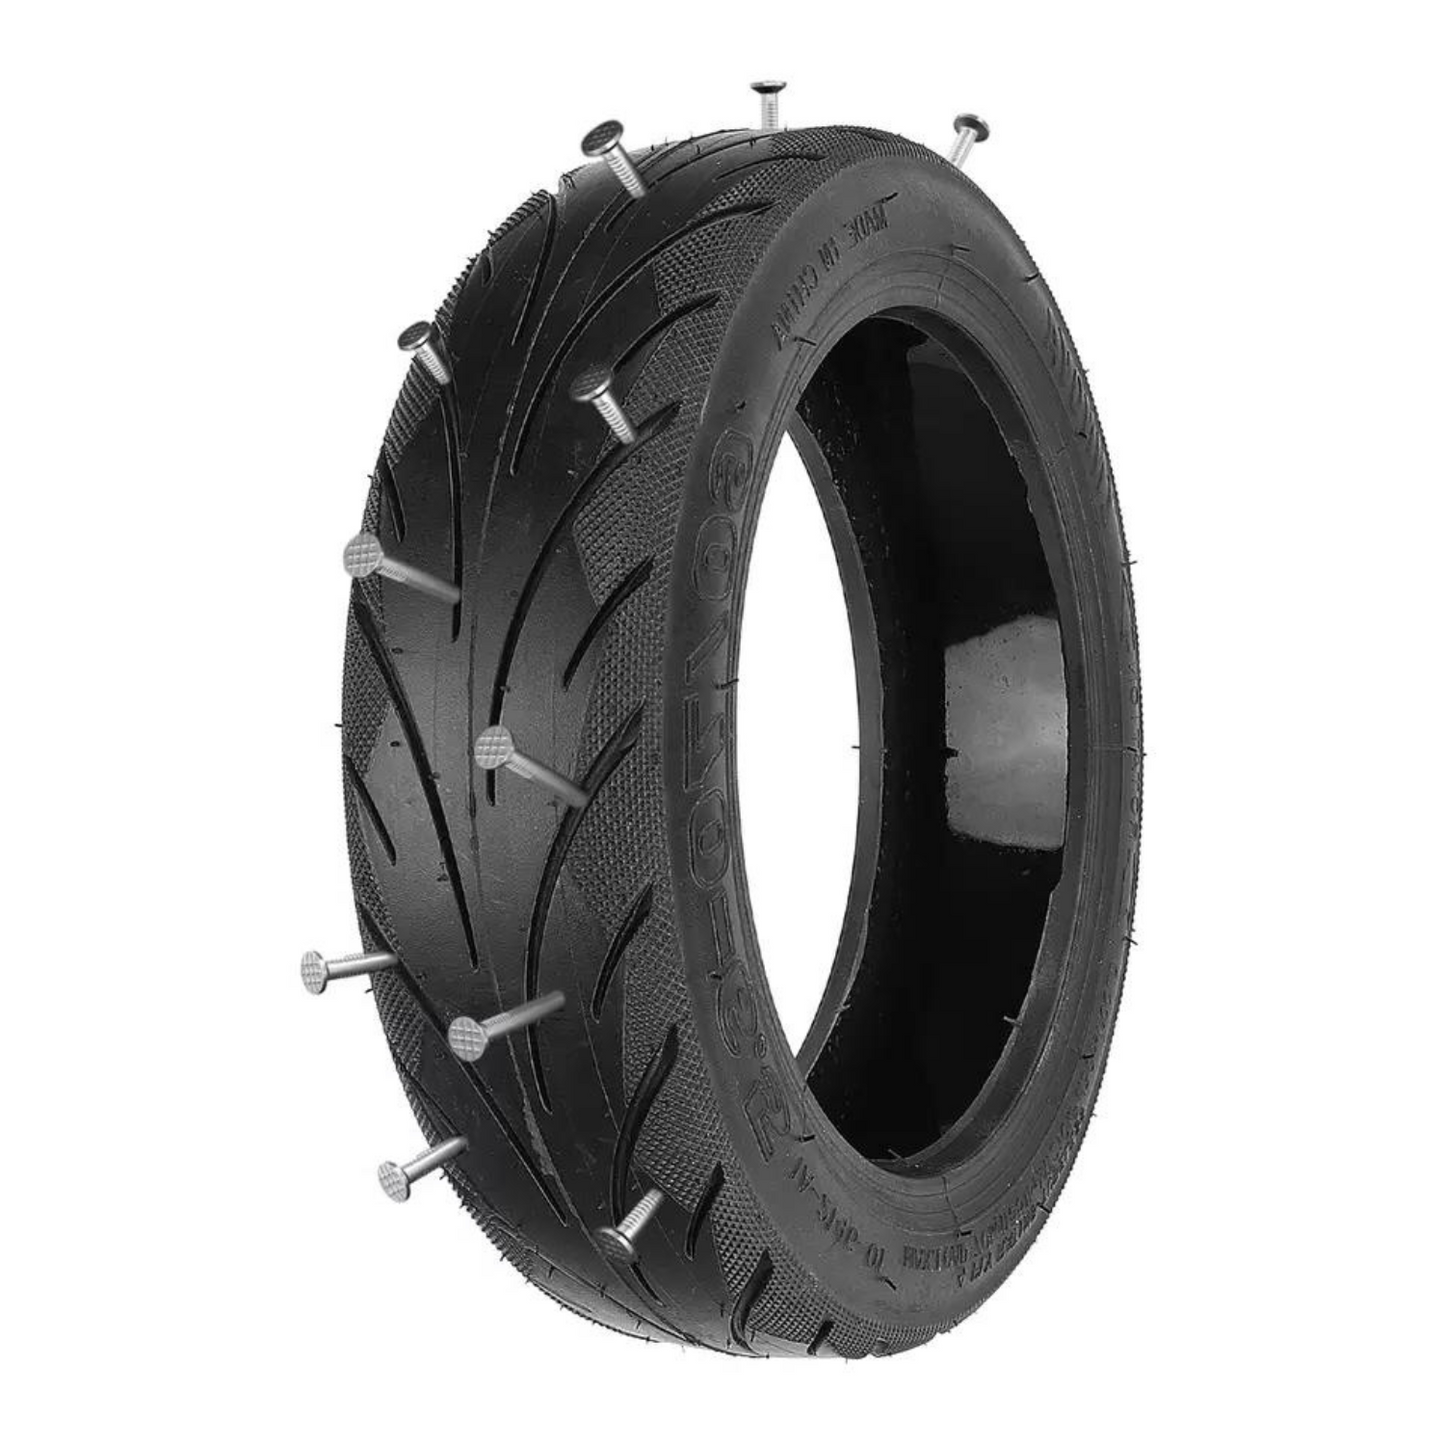 Ninebot Max G30 G30D G30D2 Tubeless Tire 10x2.5 Inch 60/70-6.5 Tubeless Tire Replacement Tire